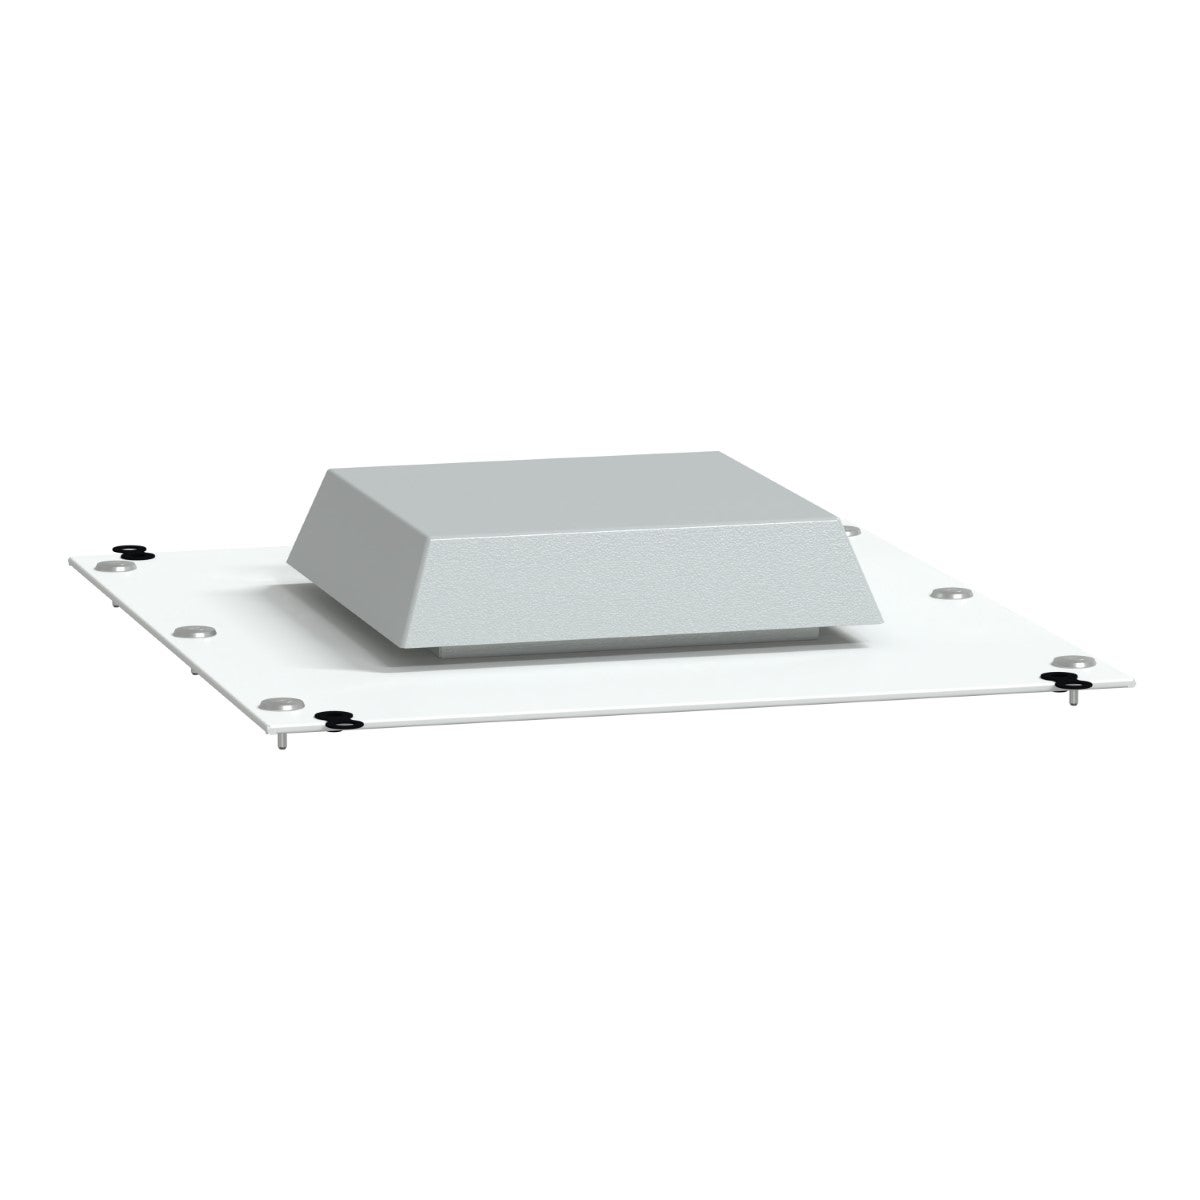 Roof plate, PrismaSeT P, for enclosure, W800mm, D400mm, IP54, with cut-out for top hood, white, RAL 9003